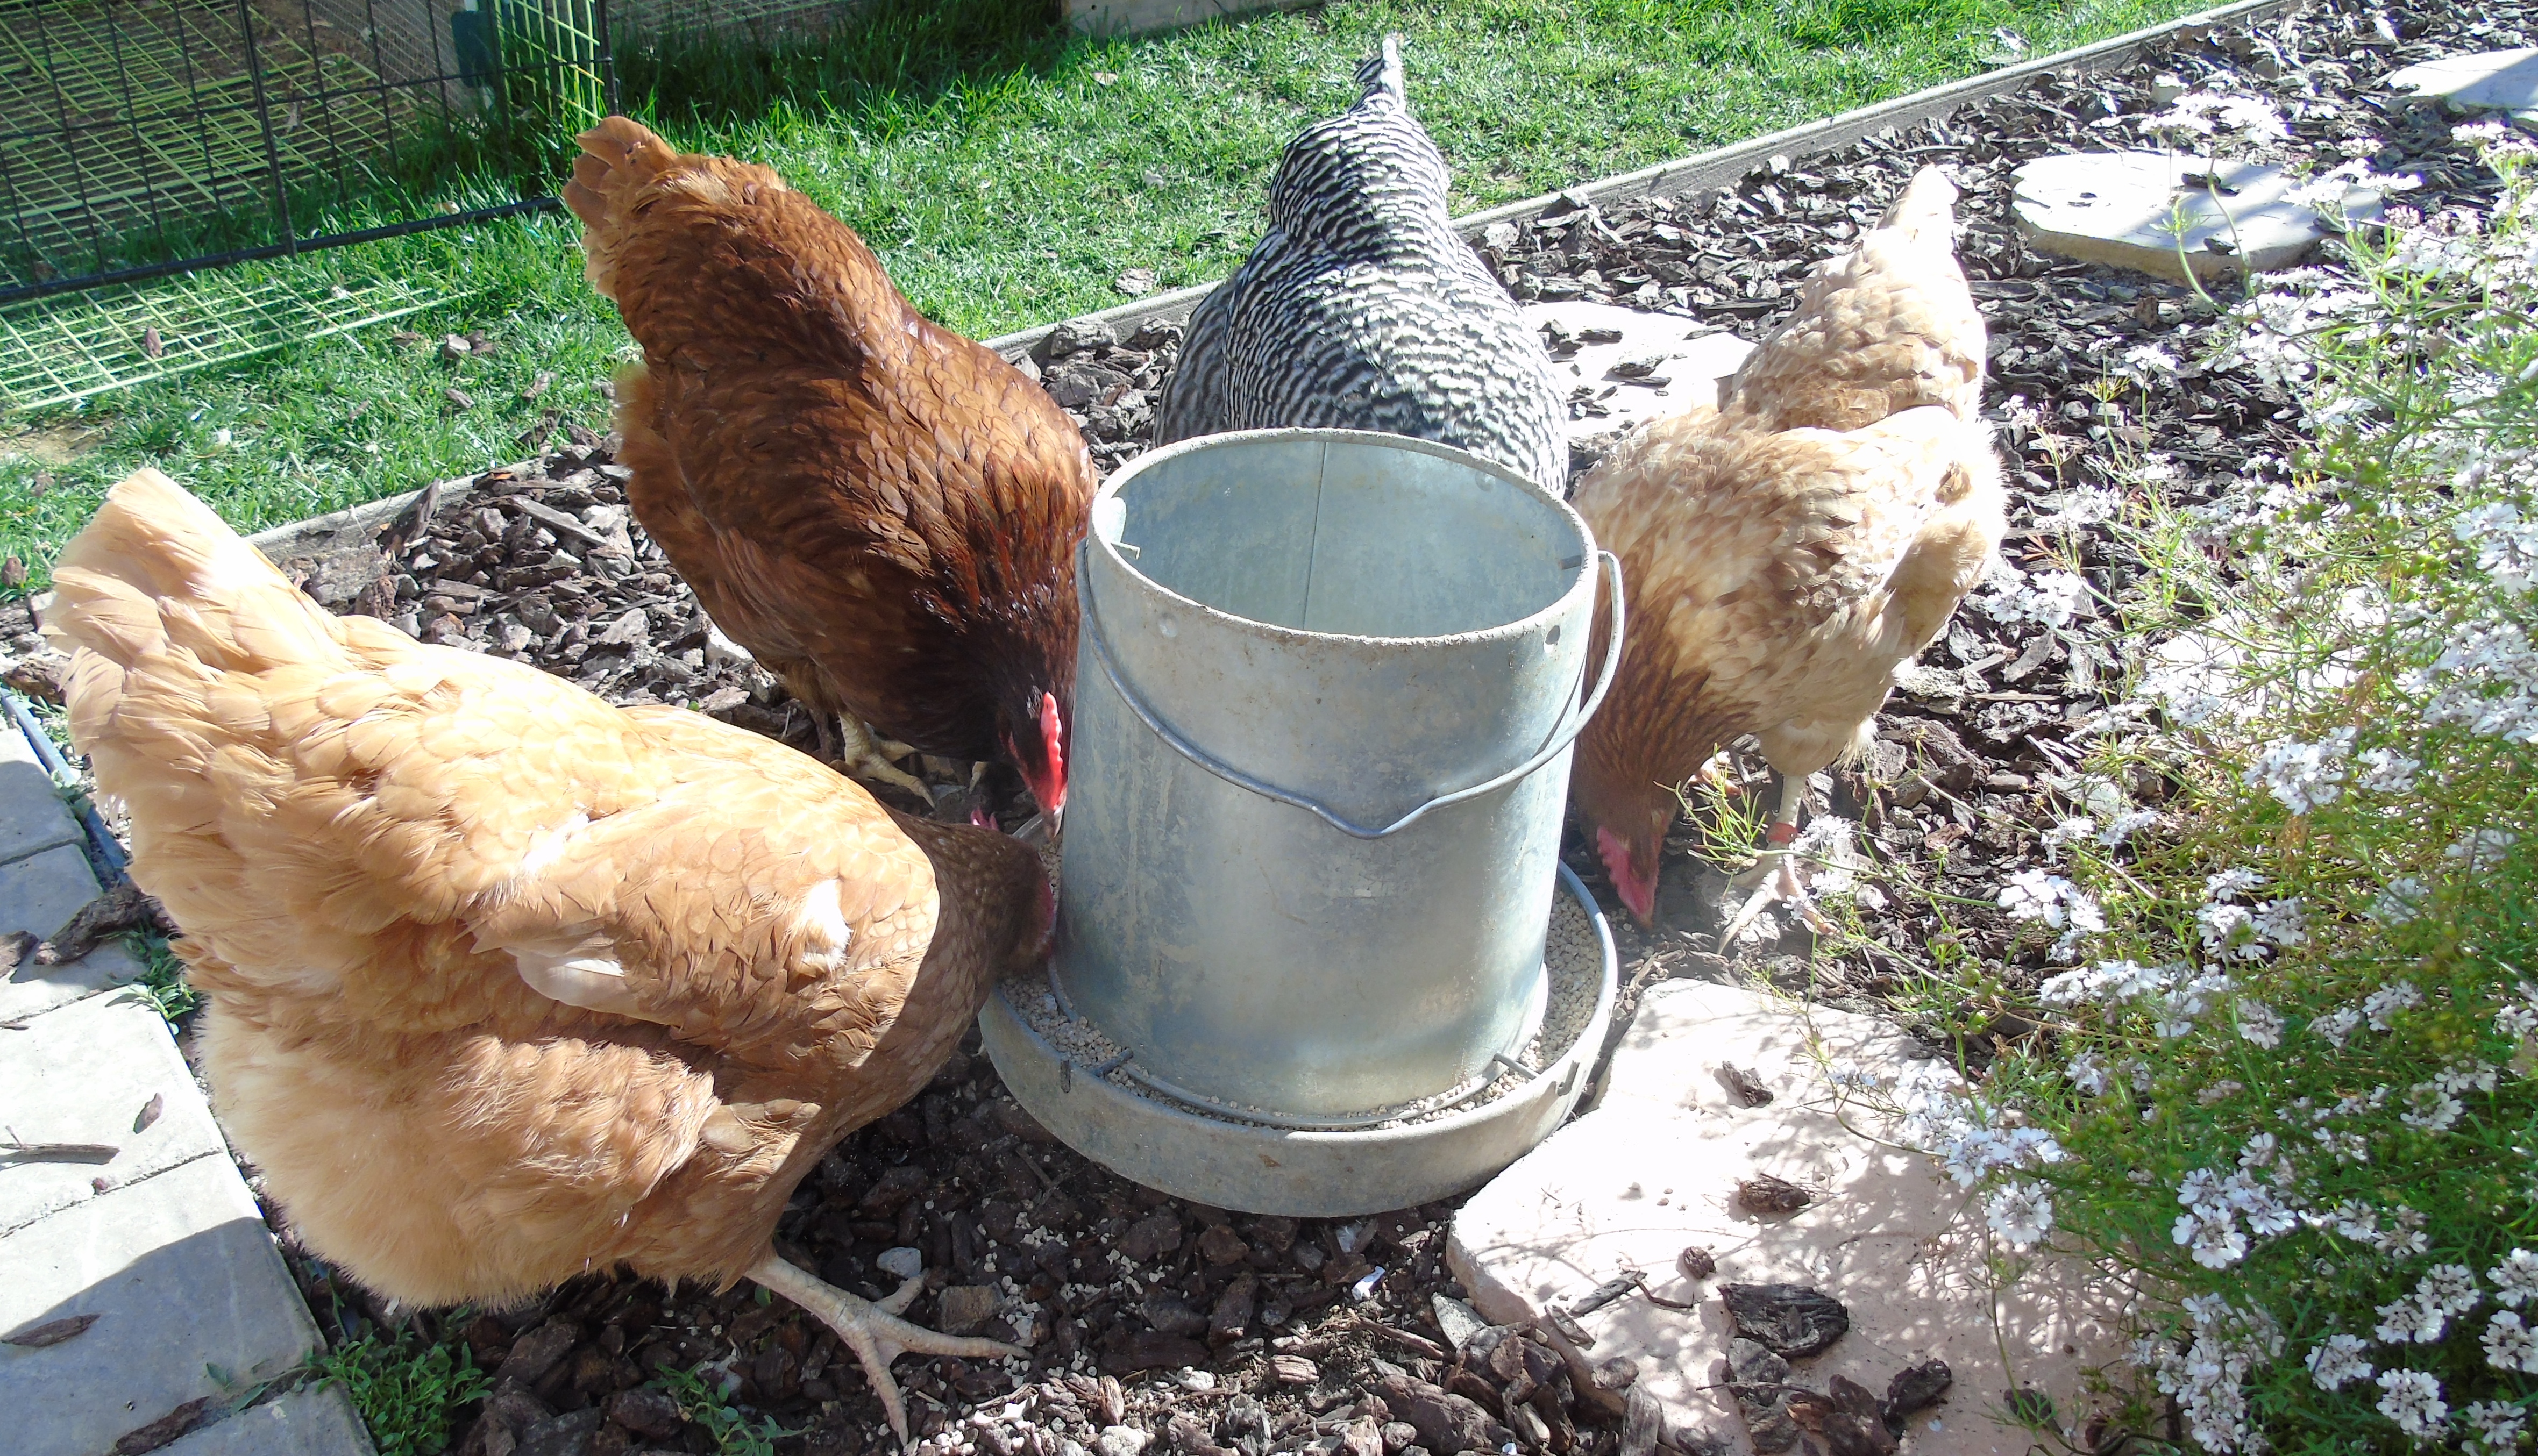 My chickens eat like pigs. 'Nuff said, really.